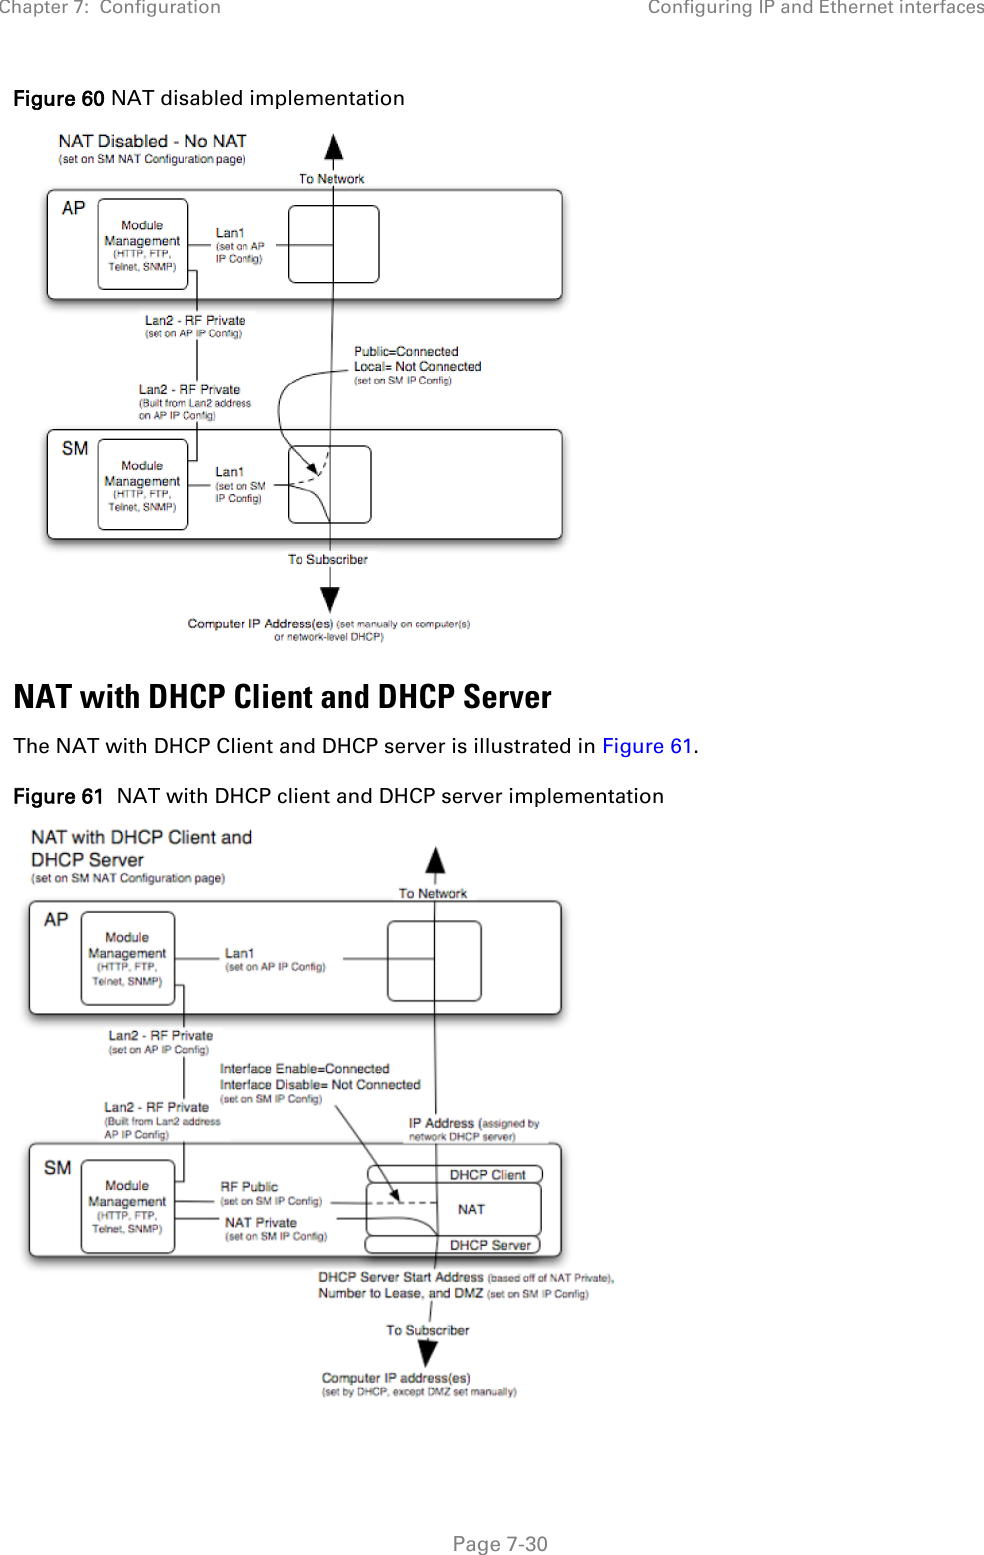 Chapter 7:  Configuration Configuring IP and Ethernet interfaces   Page 7-30 Figure 60 NAT disabled implementation  NAT with DHCP Client and DHCP Server The NAT with DHCP Client and DHCP server is illustrated in Figure 61. Figure 61  NAT with DHCP client and DHCP server implementation  